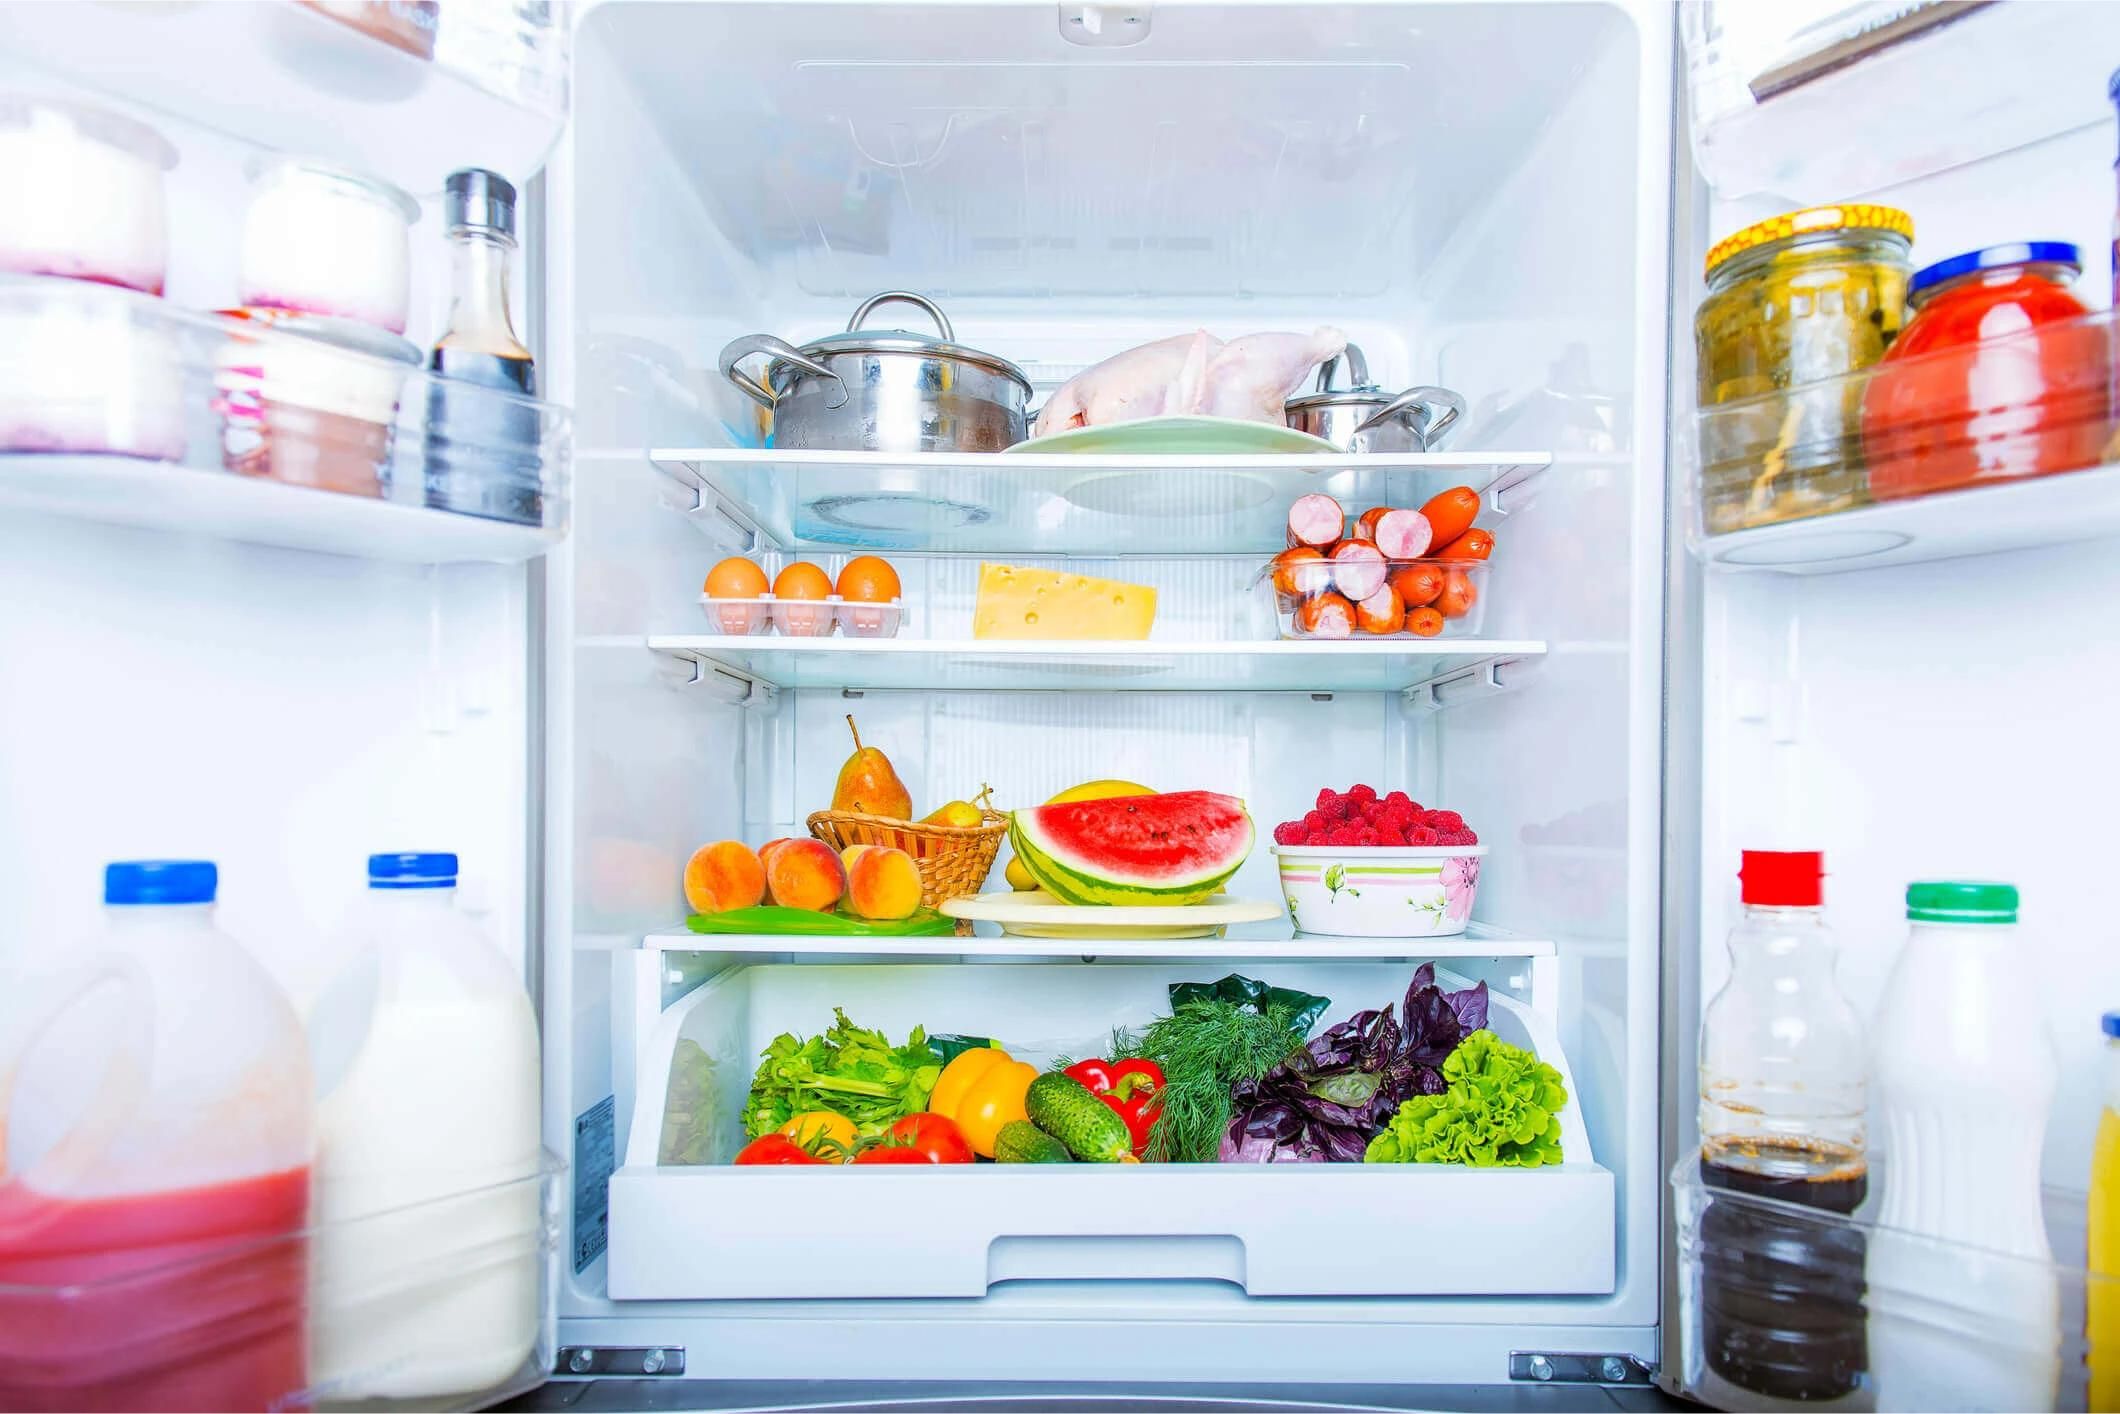 How To Safely Store A Refrigerator